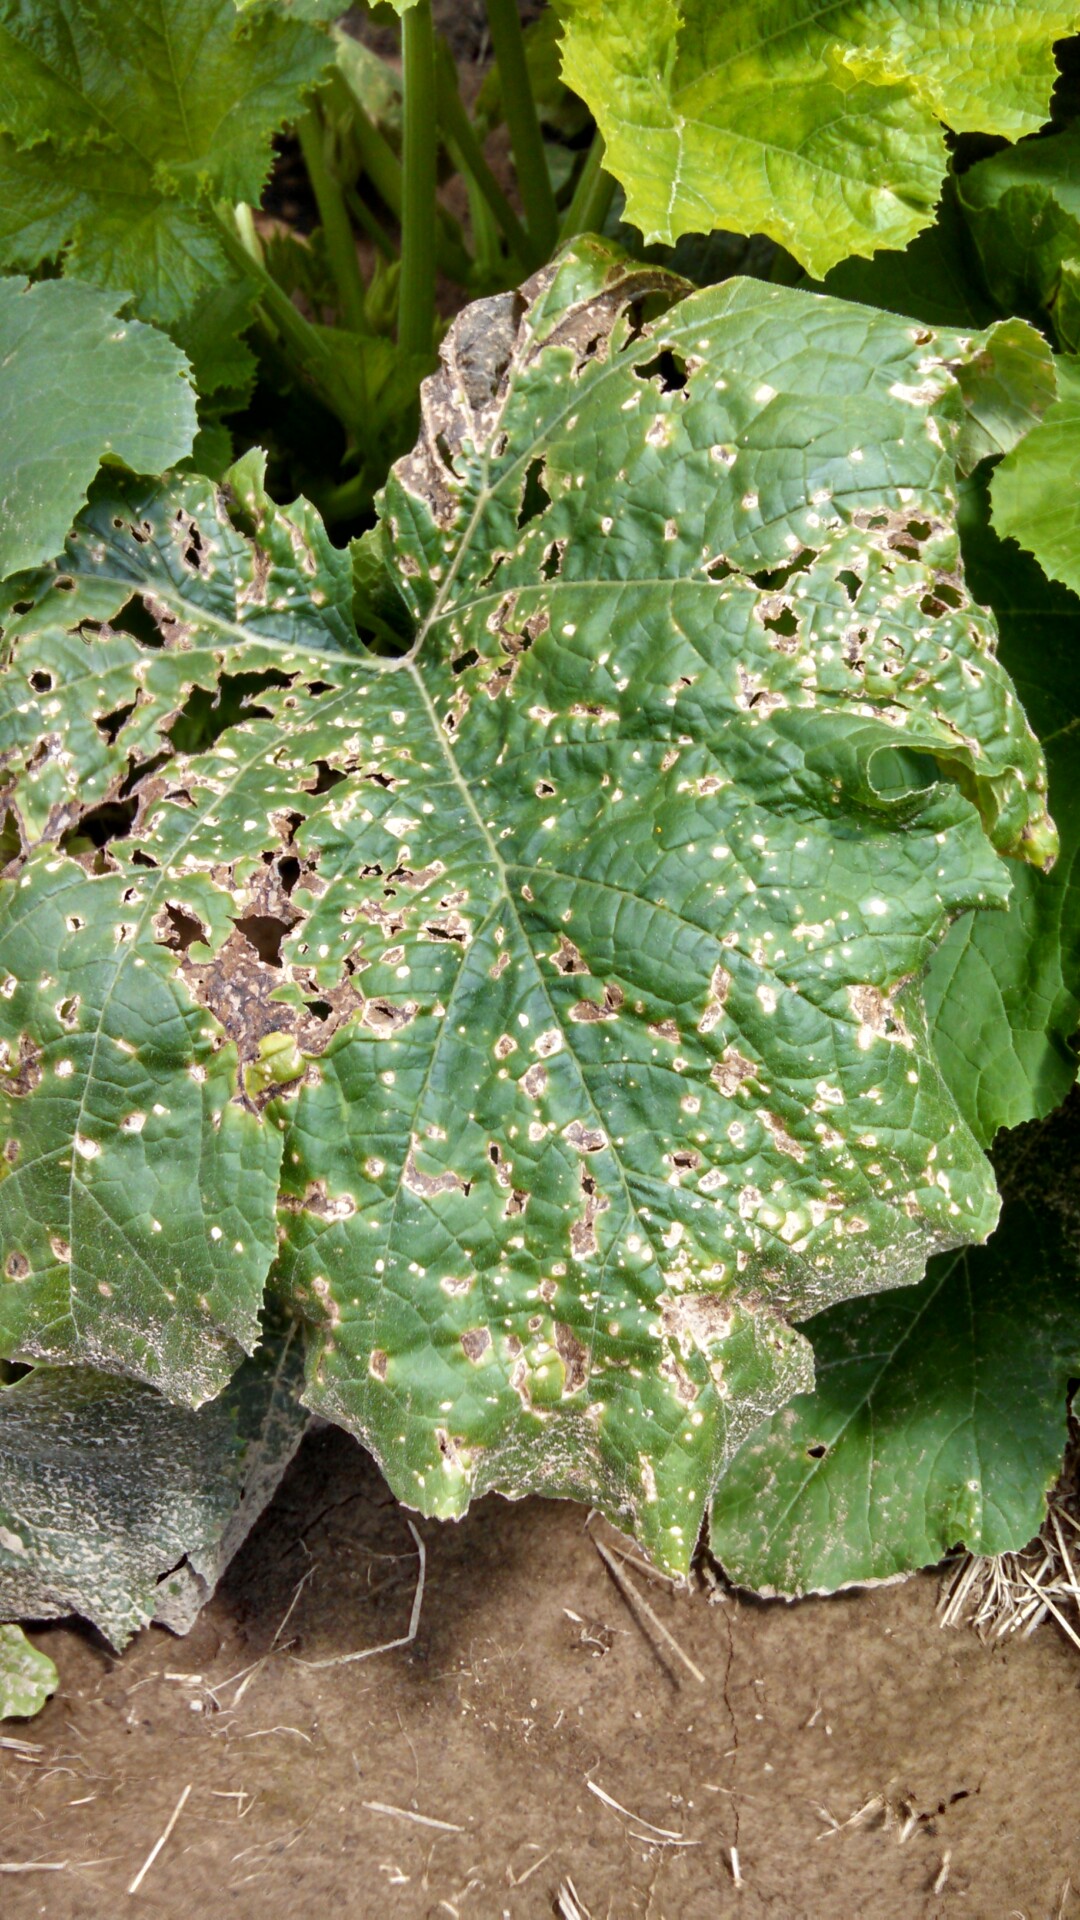  Lesions of bacterial leaf spot on a pumpkin leaf are often a light brown and maybe somewhat angular in shape.